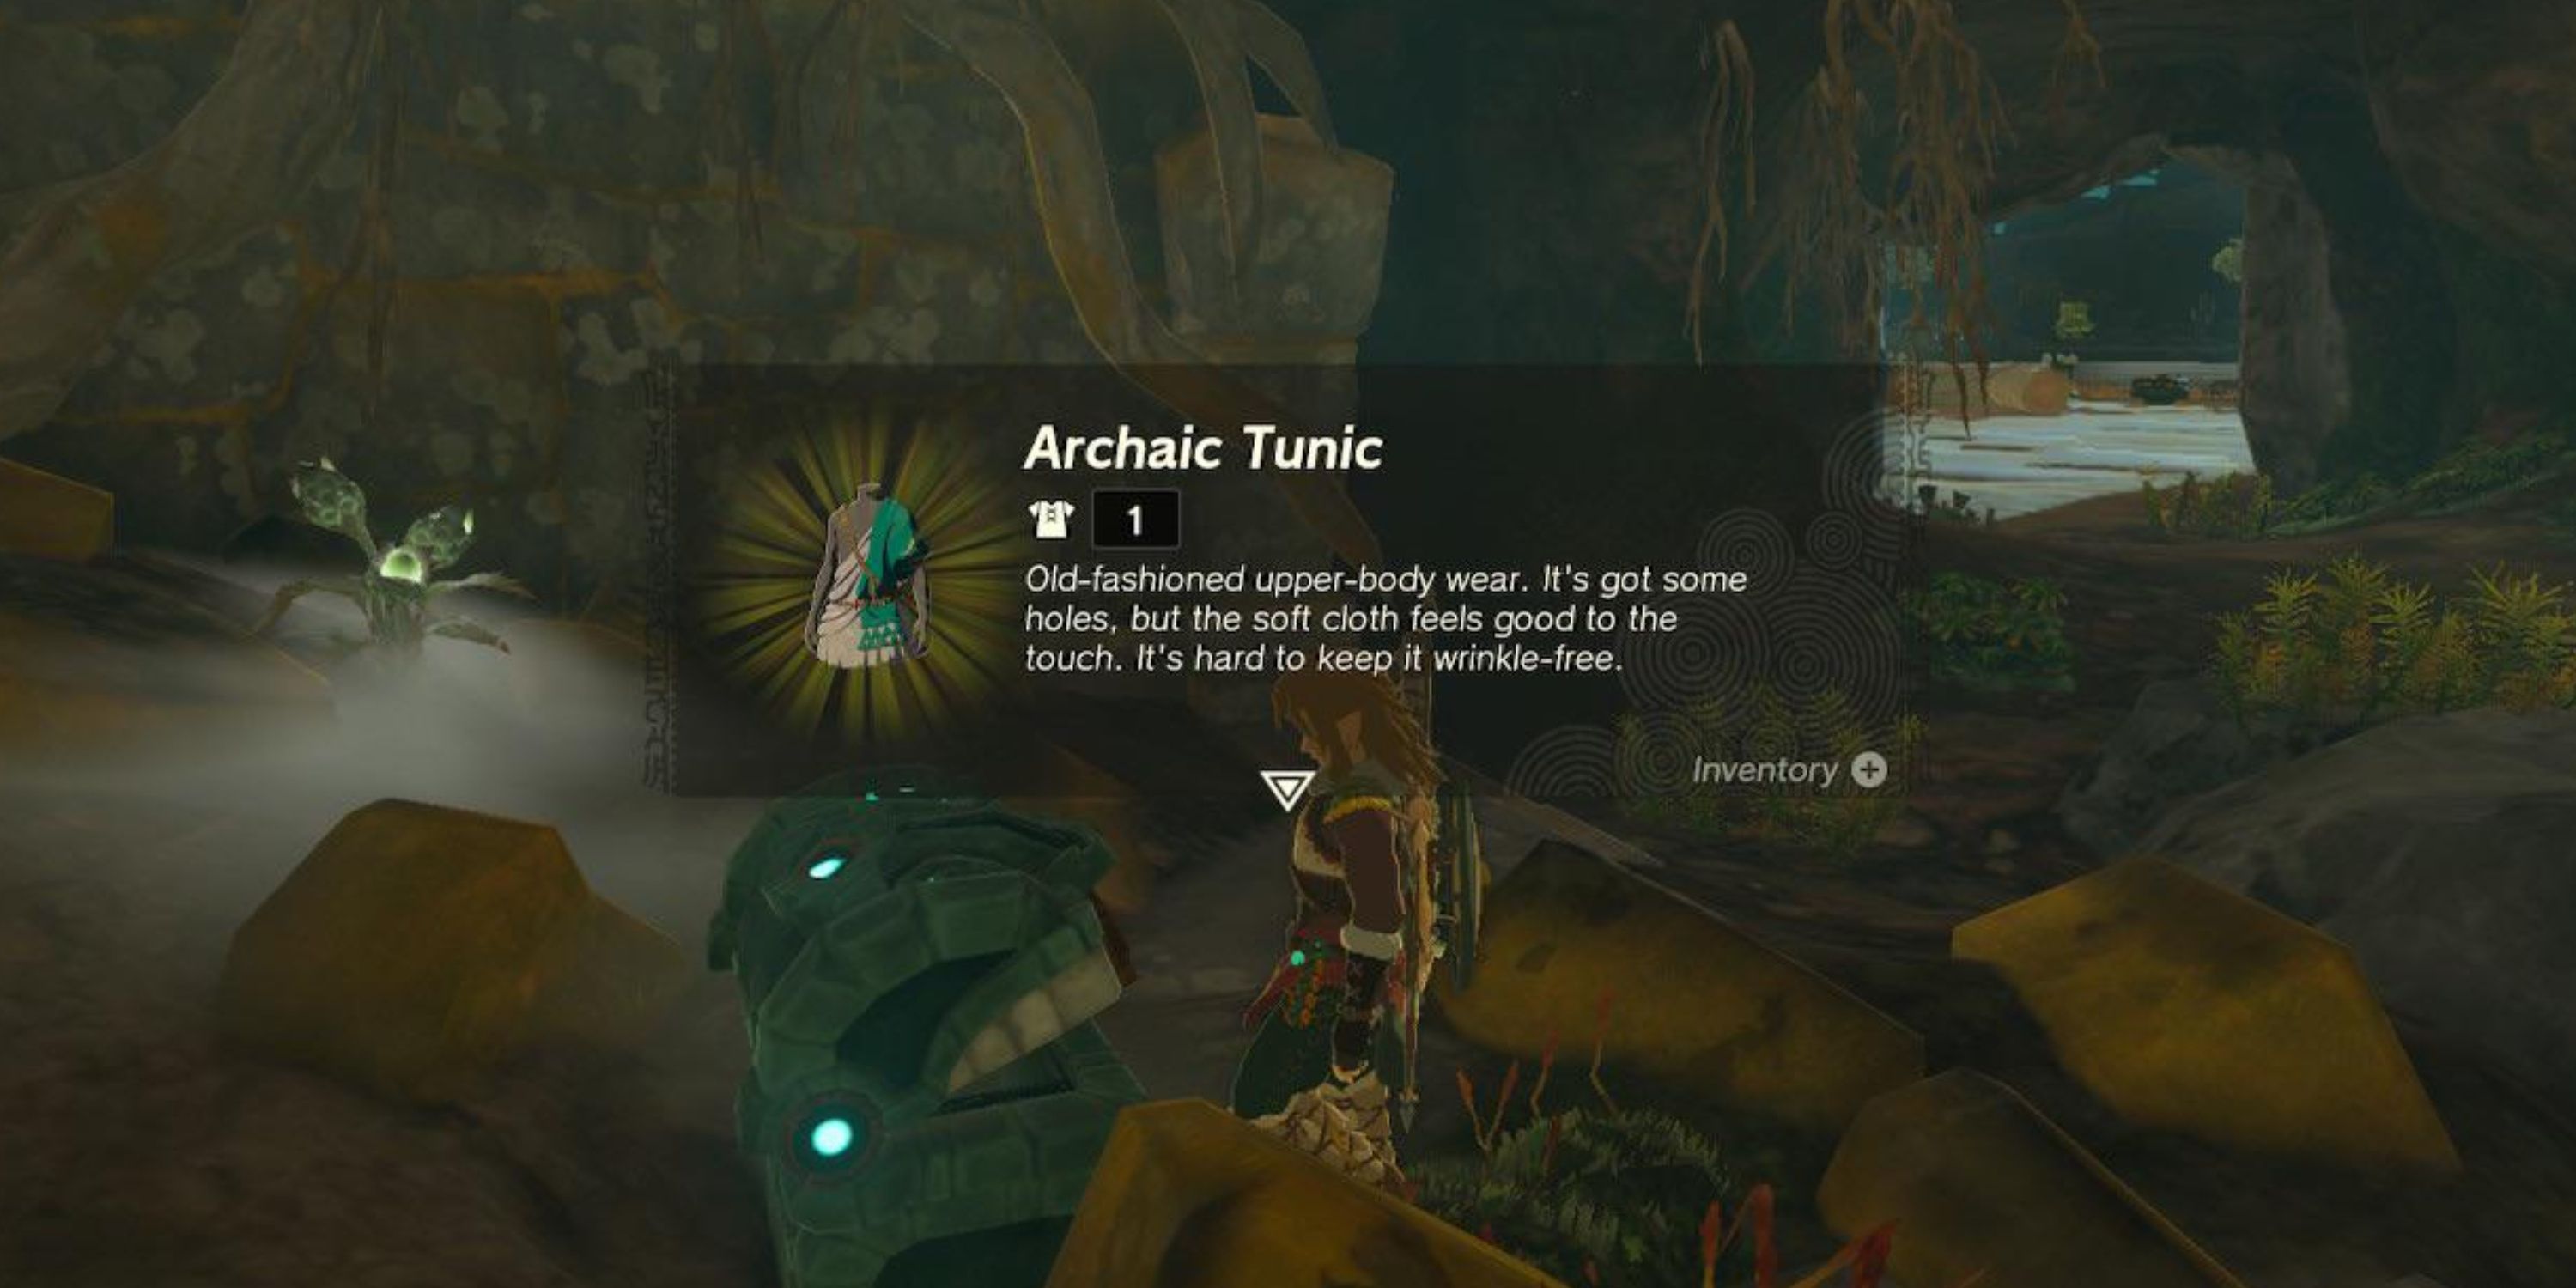 The Archaic Tunic lies within the Pondside cave